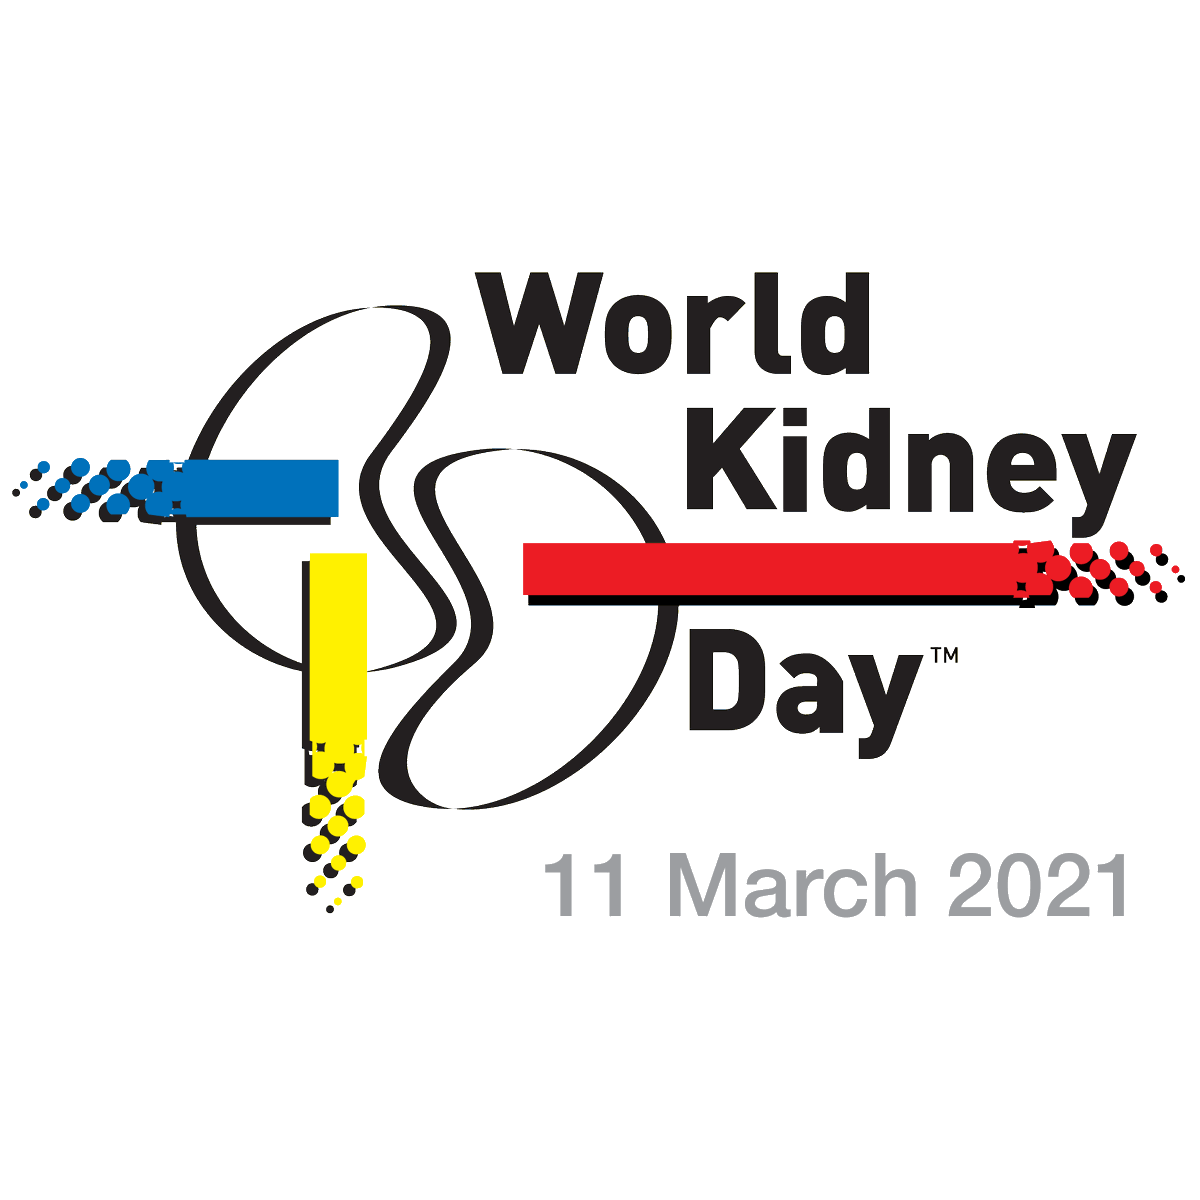 Today's World KIDNEY Day.There's an alarming rise in kidney issues

Here are 6 tips to a healthy kidney

1.Regular exercise
2. Watch your blood sugar & BP
3. Watch what you eat & drink
4.Drink lots of water
5.Stop Smoking
6. Do away with AGBO

RT for awareness
#worldkidneyday2021